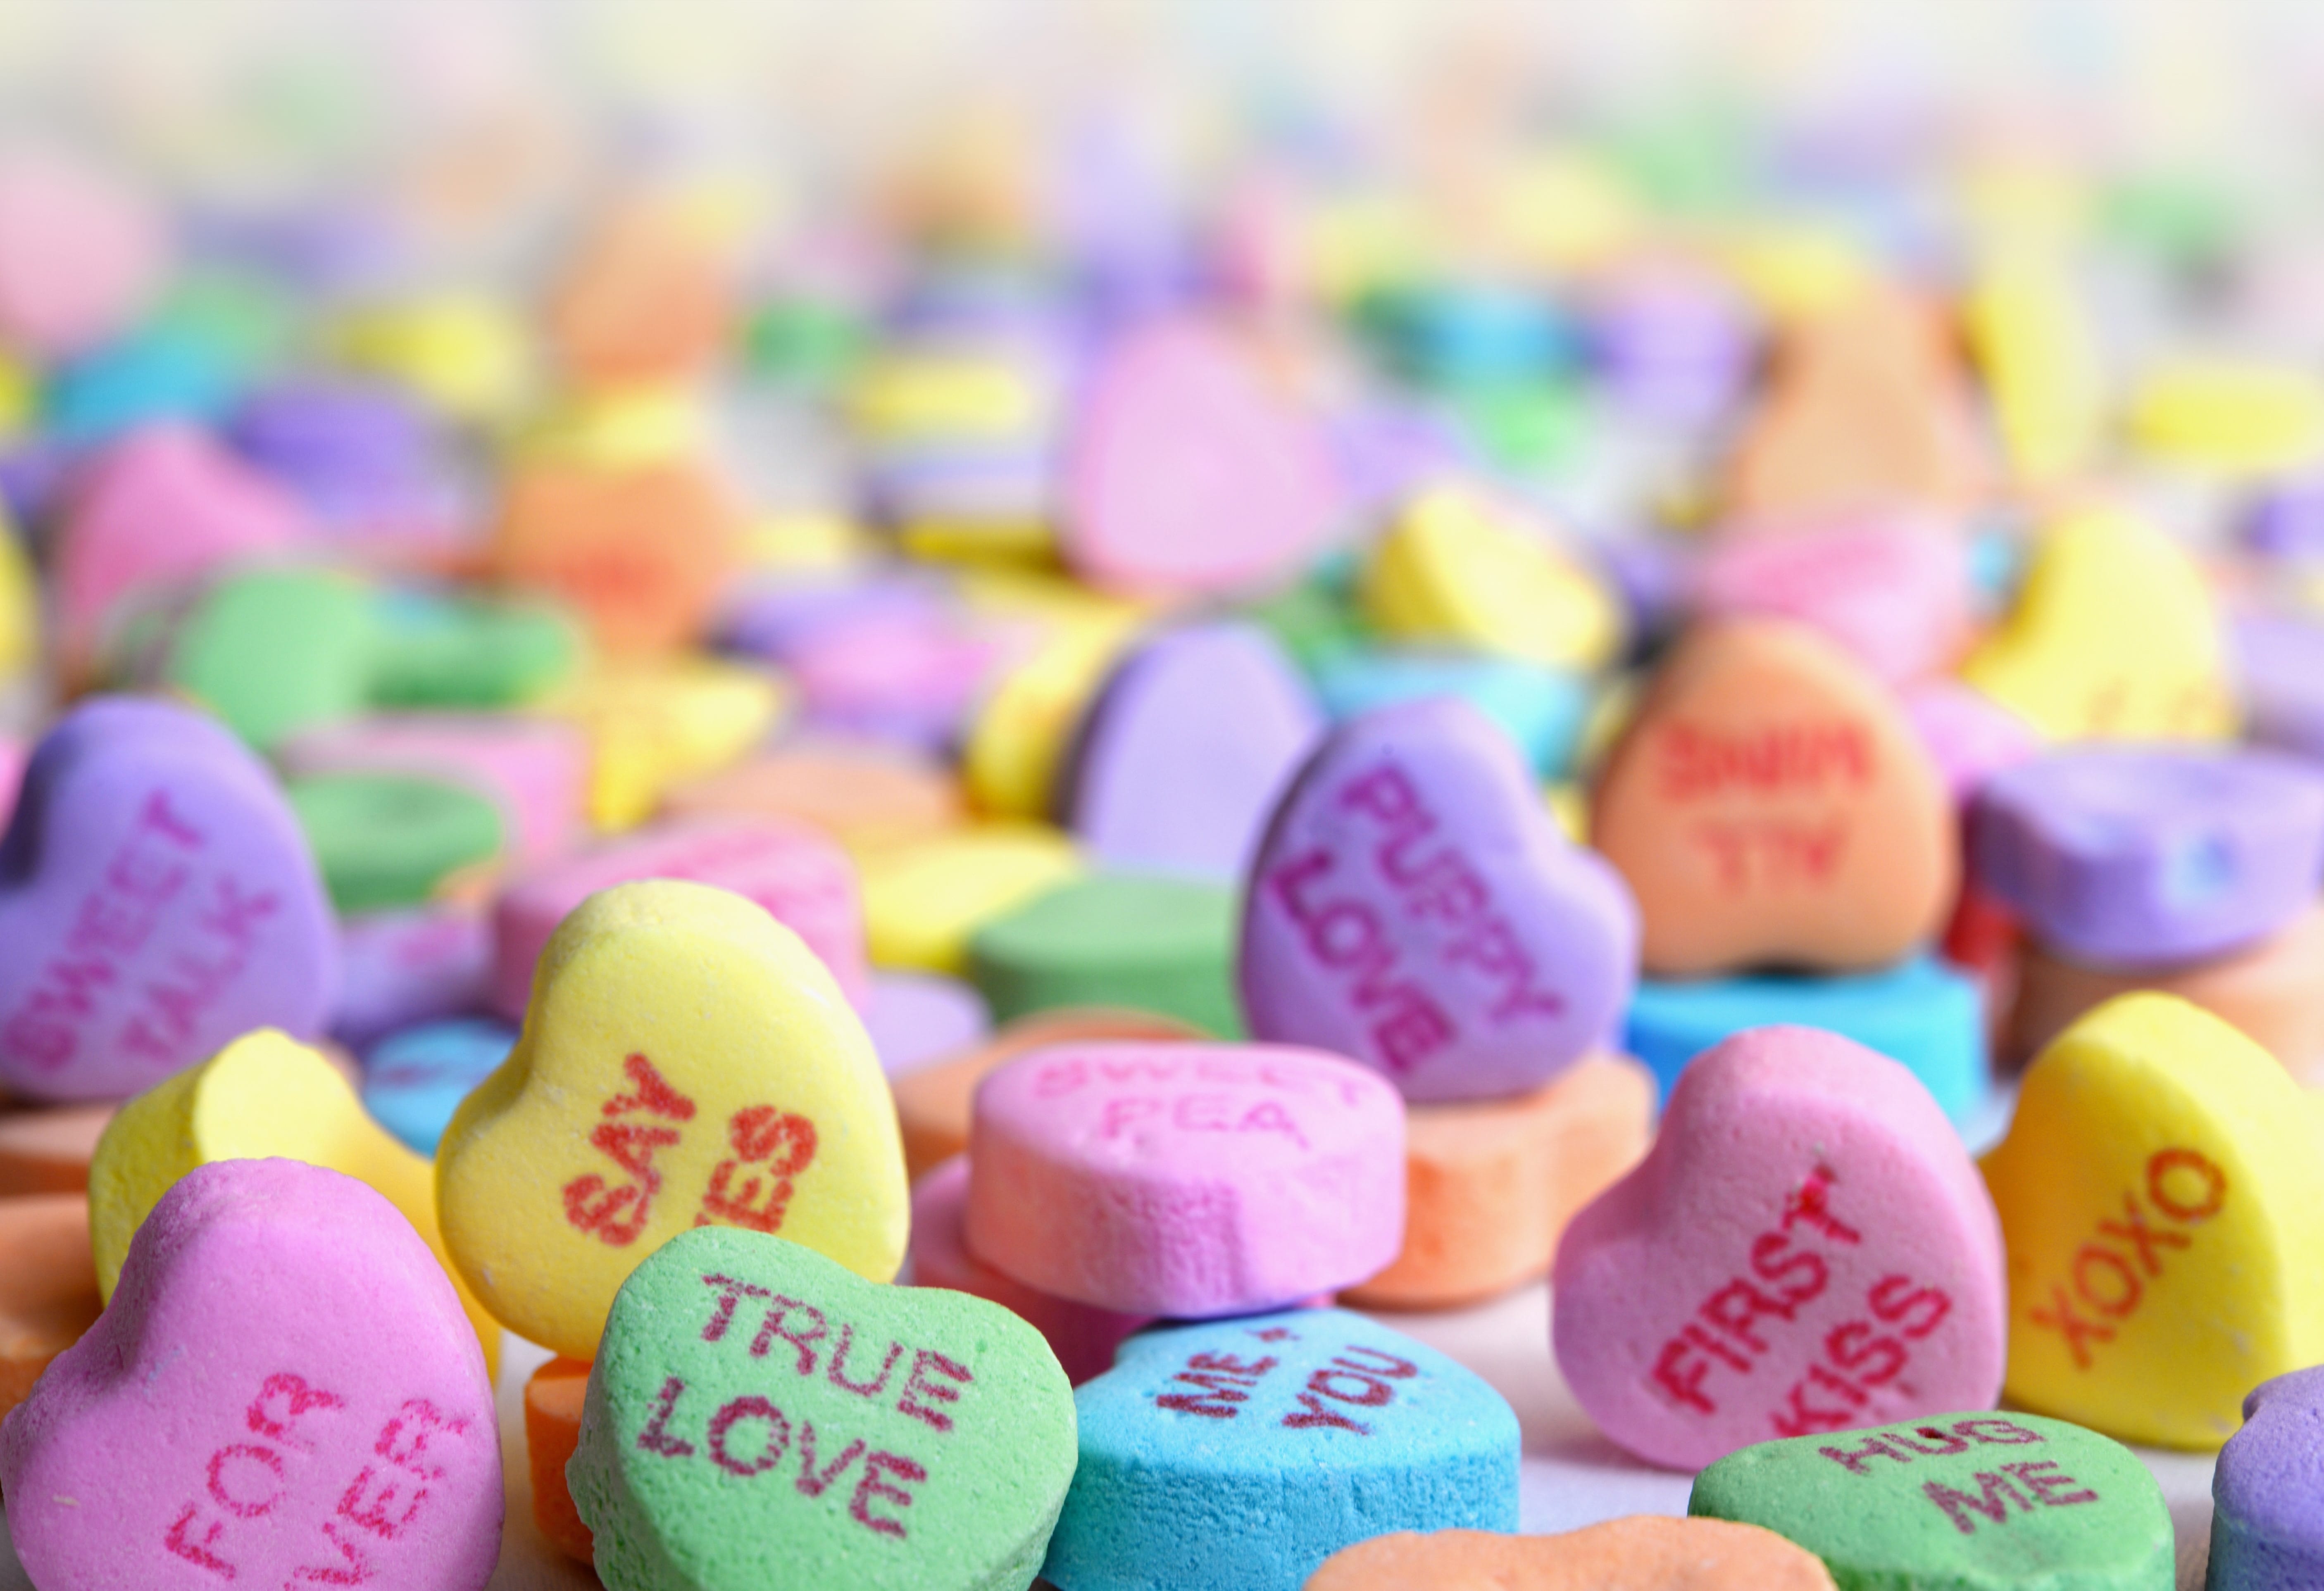 How to Say Happy Valentine’s Day in Various Languages